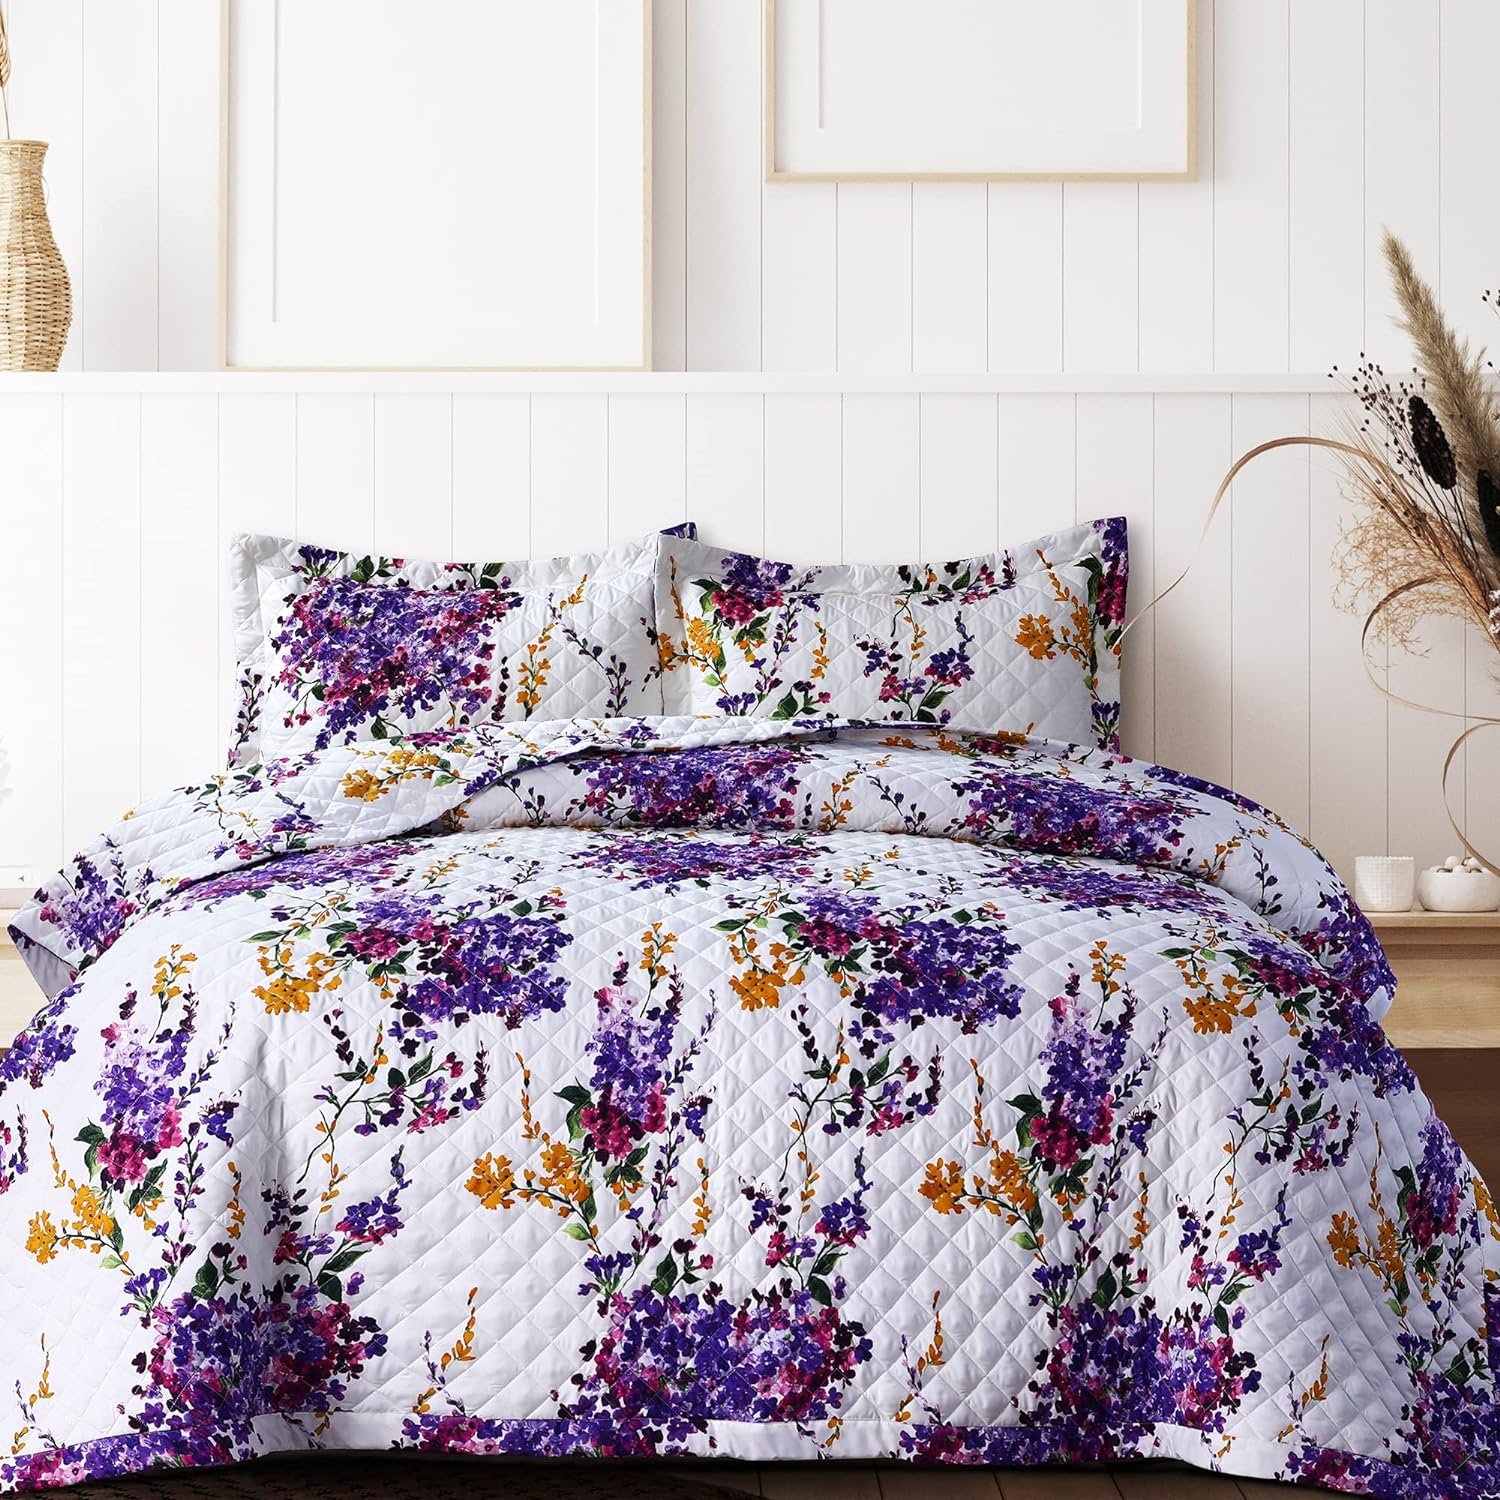 Serena Floral Printed Ultra-Soft 2-Piece Oversized Quilt Set, Easy Care and Fade Resistant - Twin, Multicolor